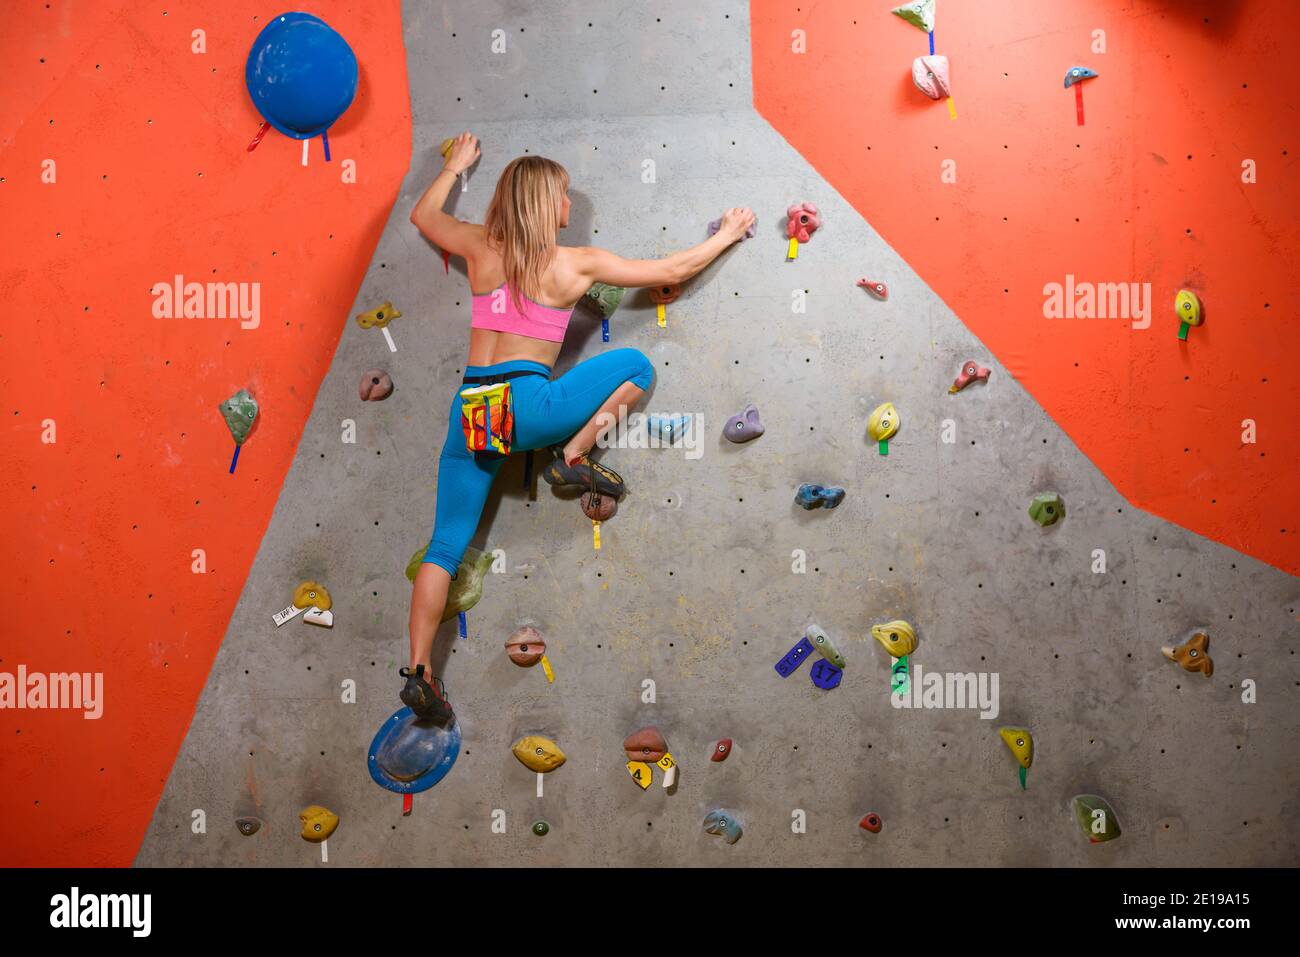 Climbing Gym. Young Woman Climber Bouldering. Extreme Sport and Indoor Climbing Concept Stock Photo